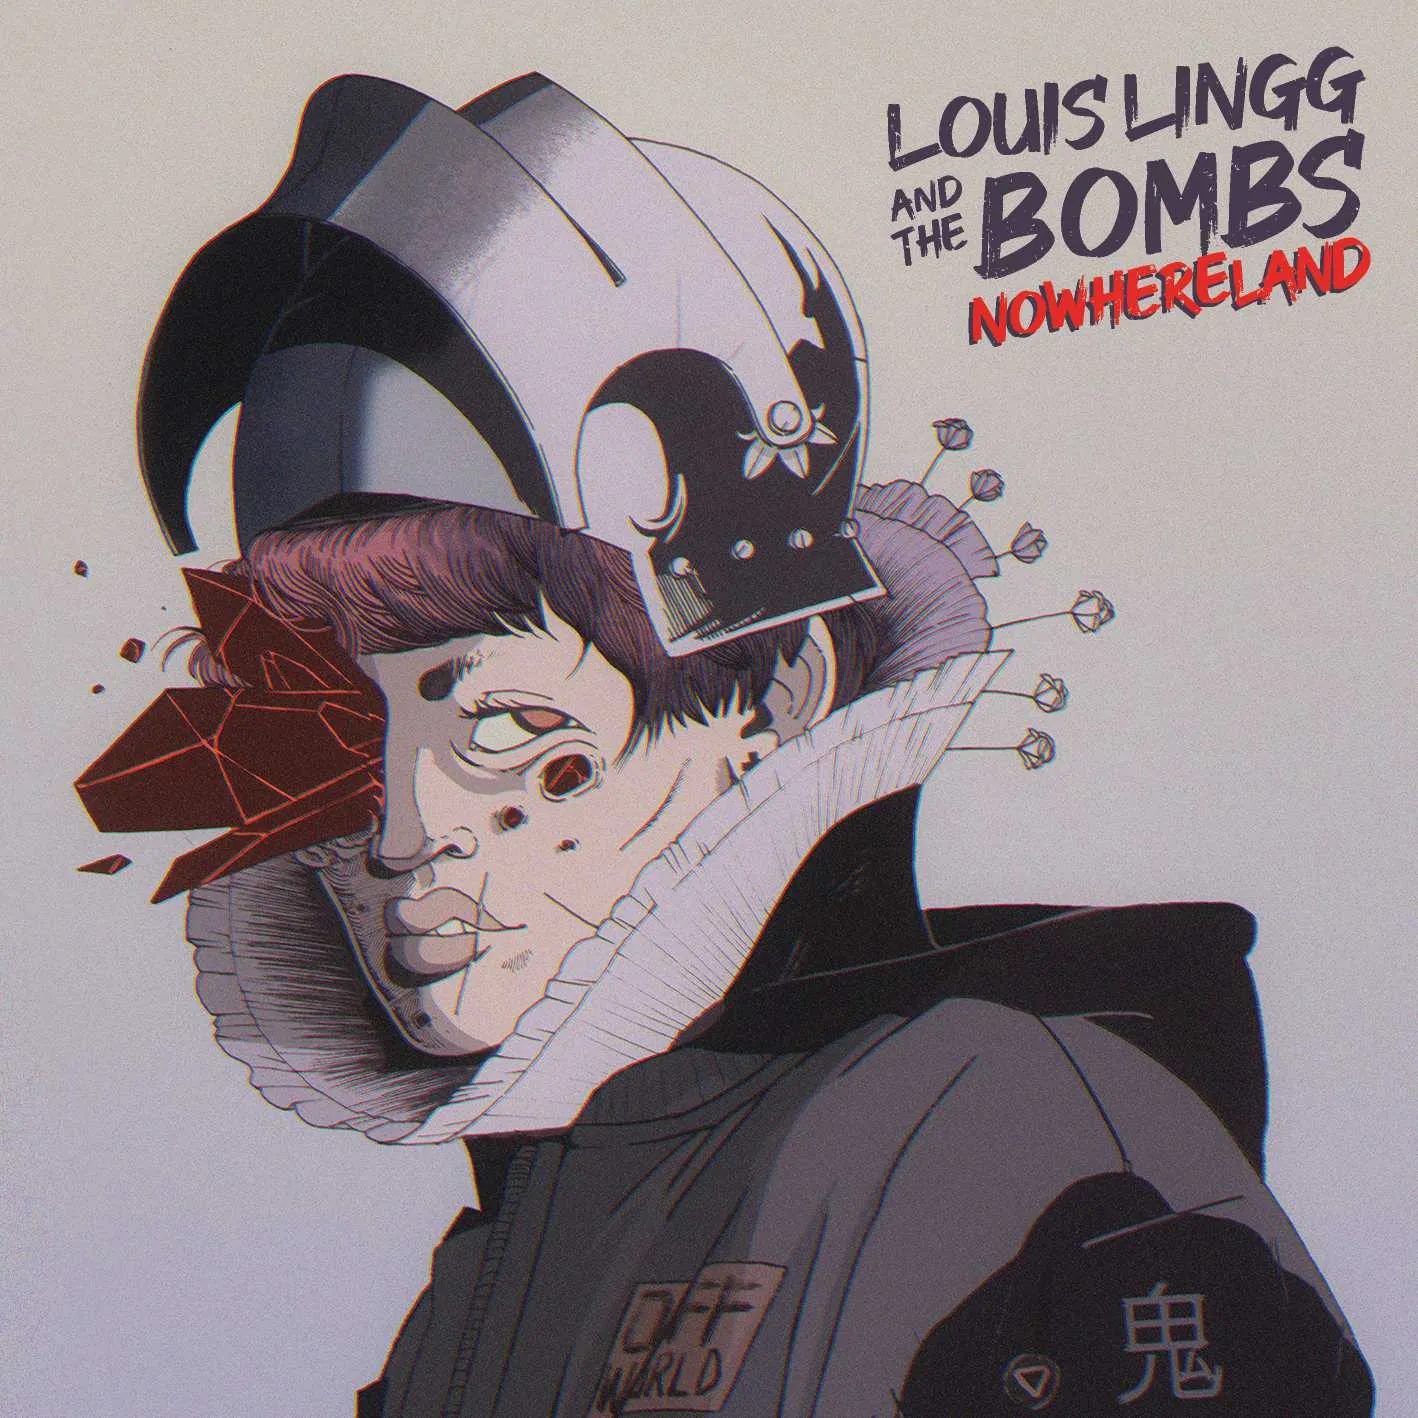 Album cover for “Nowhereland” by Louis Lingg and The Bombs